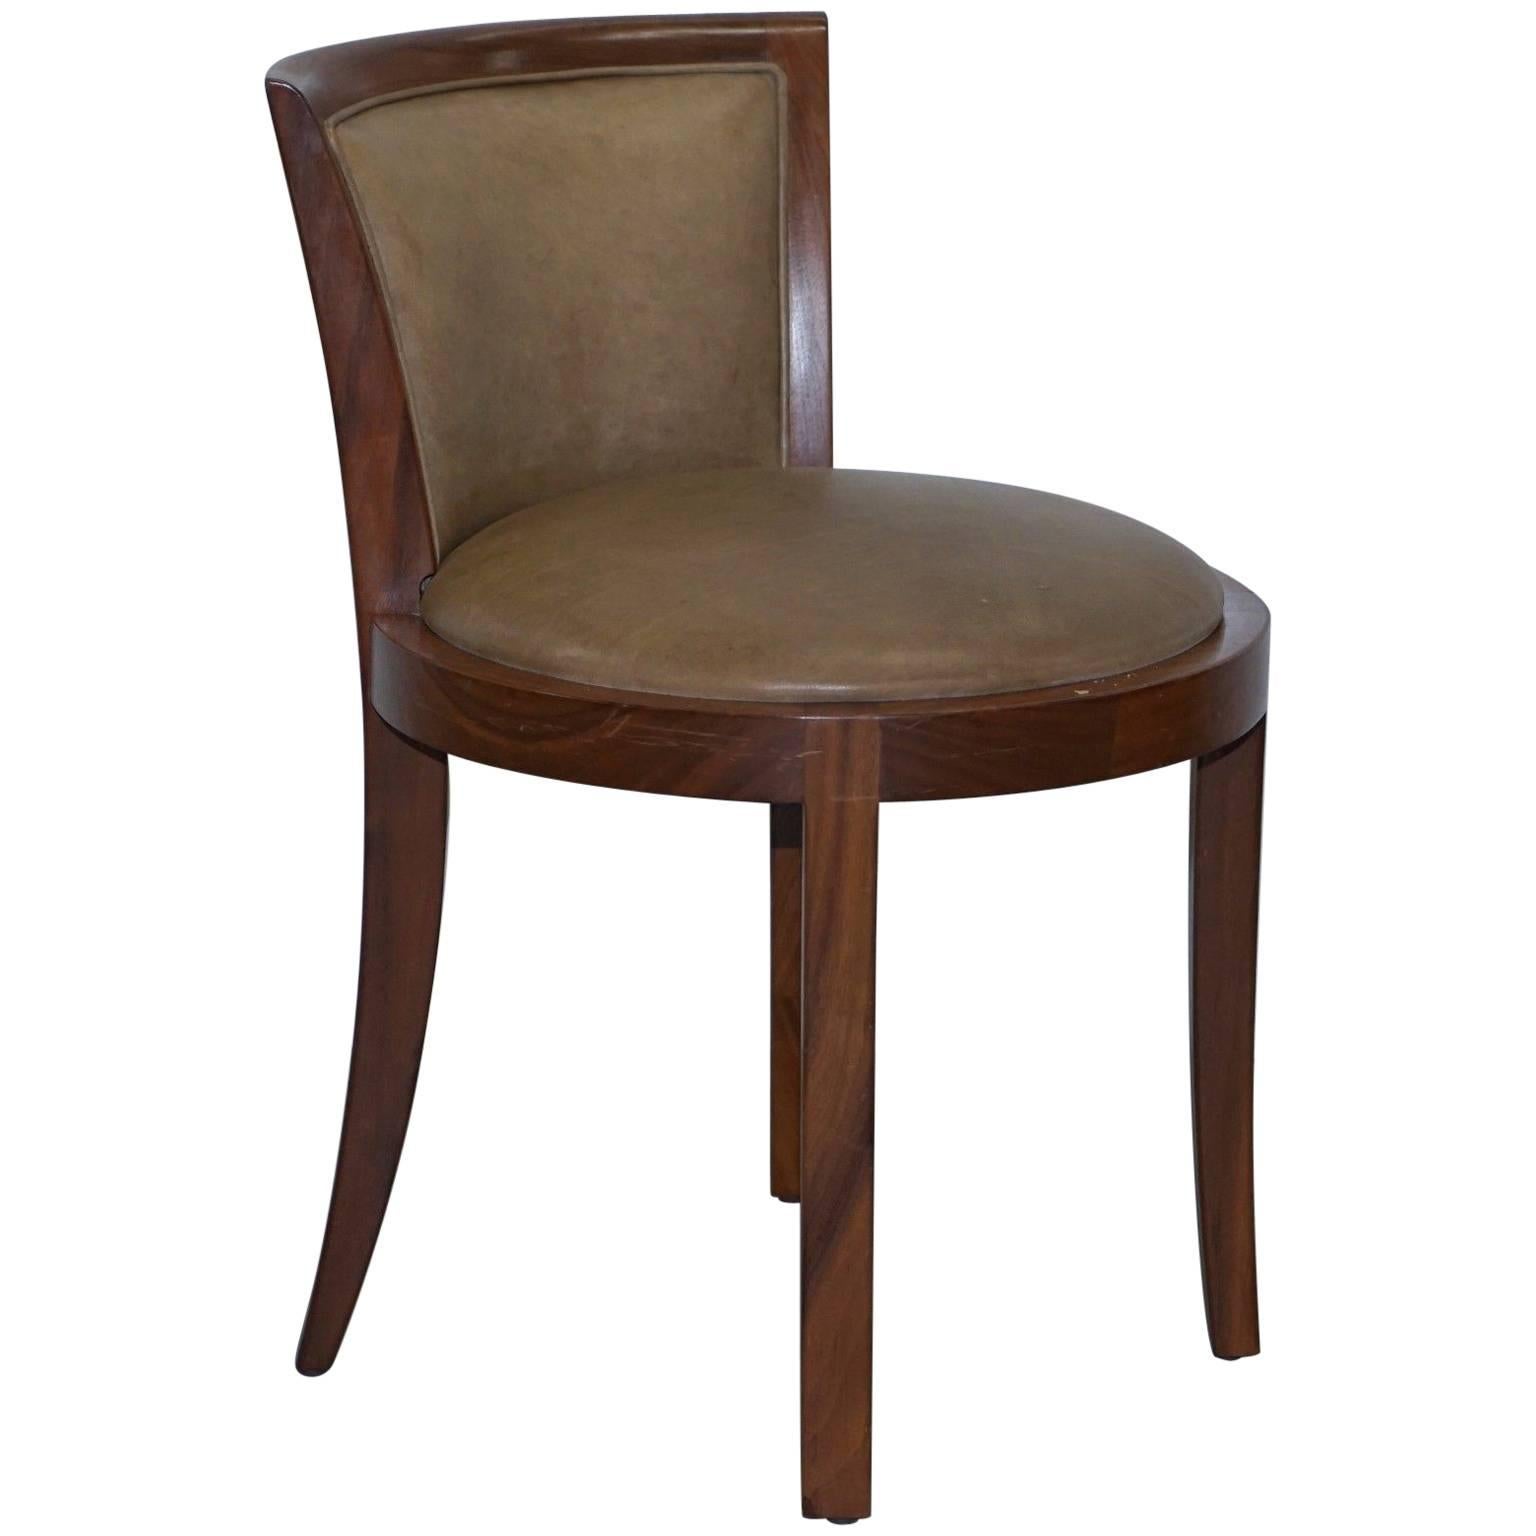 Starbay "The Living Legend" Greta Ash Dressing Table Chair Leather